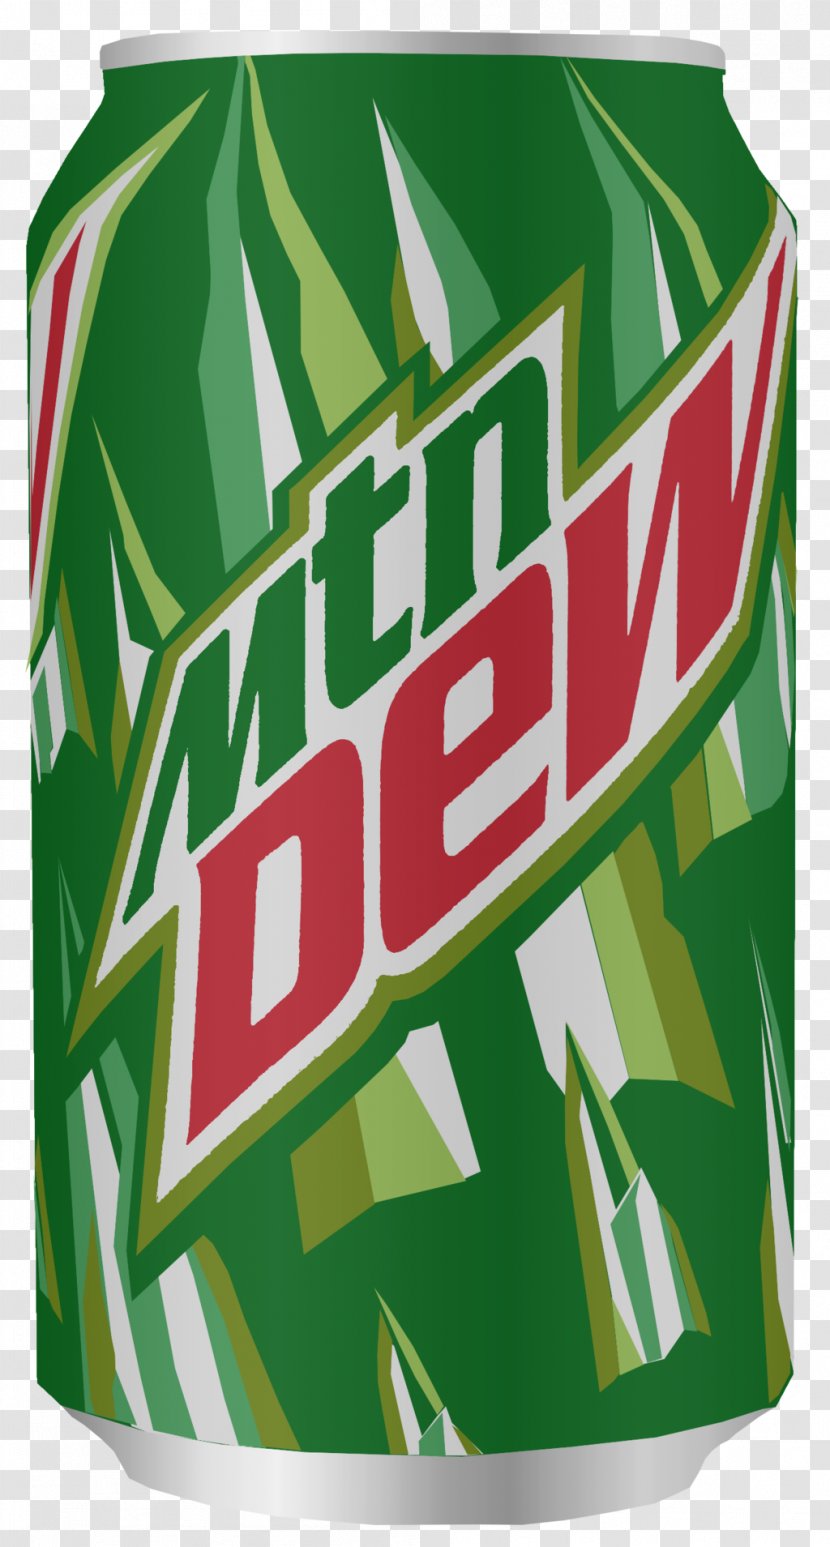 Fizzy Drinks Diet Mountain Dew Cola Pepsi Carbonated Drink Transparent PNG